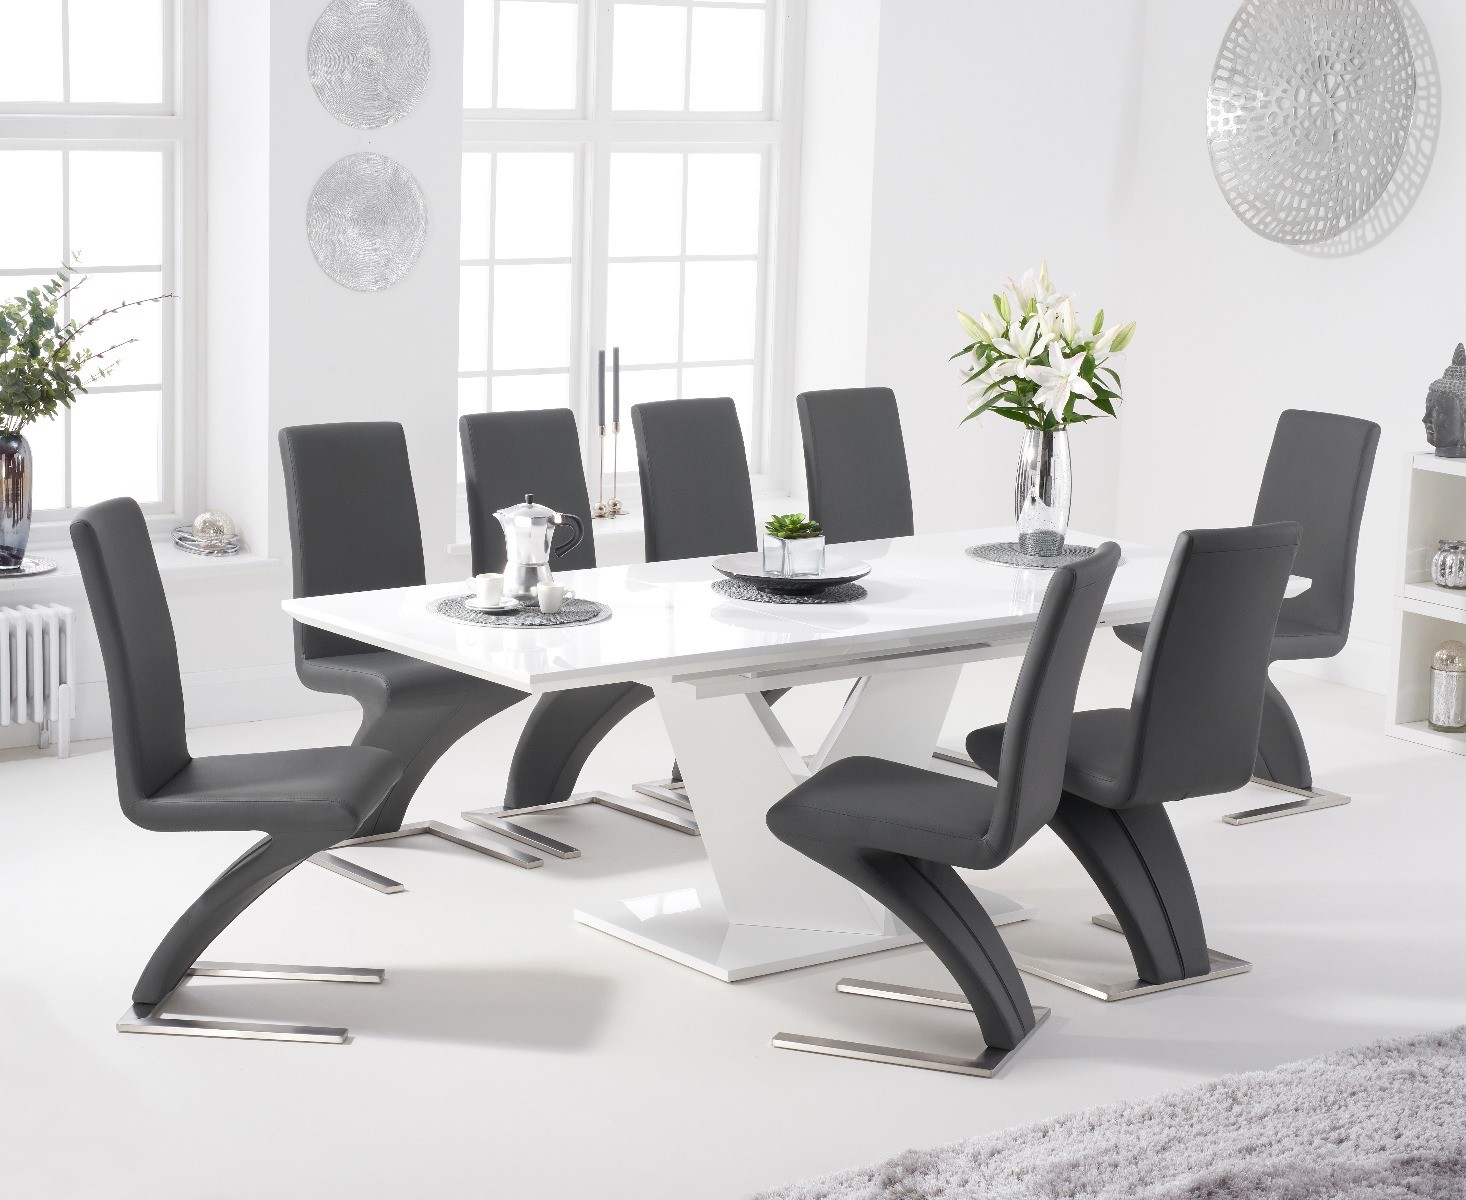 Vittorio 160cm White High Gloss Extending Dining Table With 6 Grey Hampstead Faux Leather Chairs